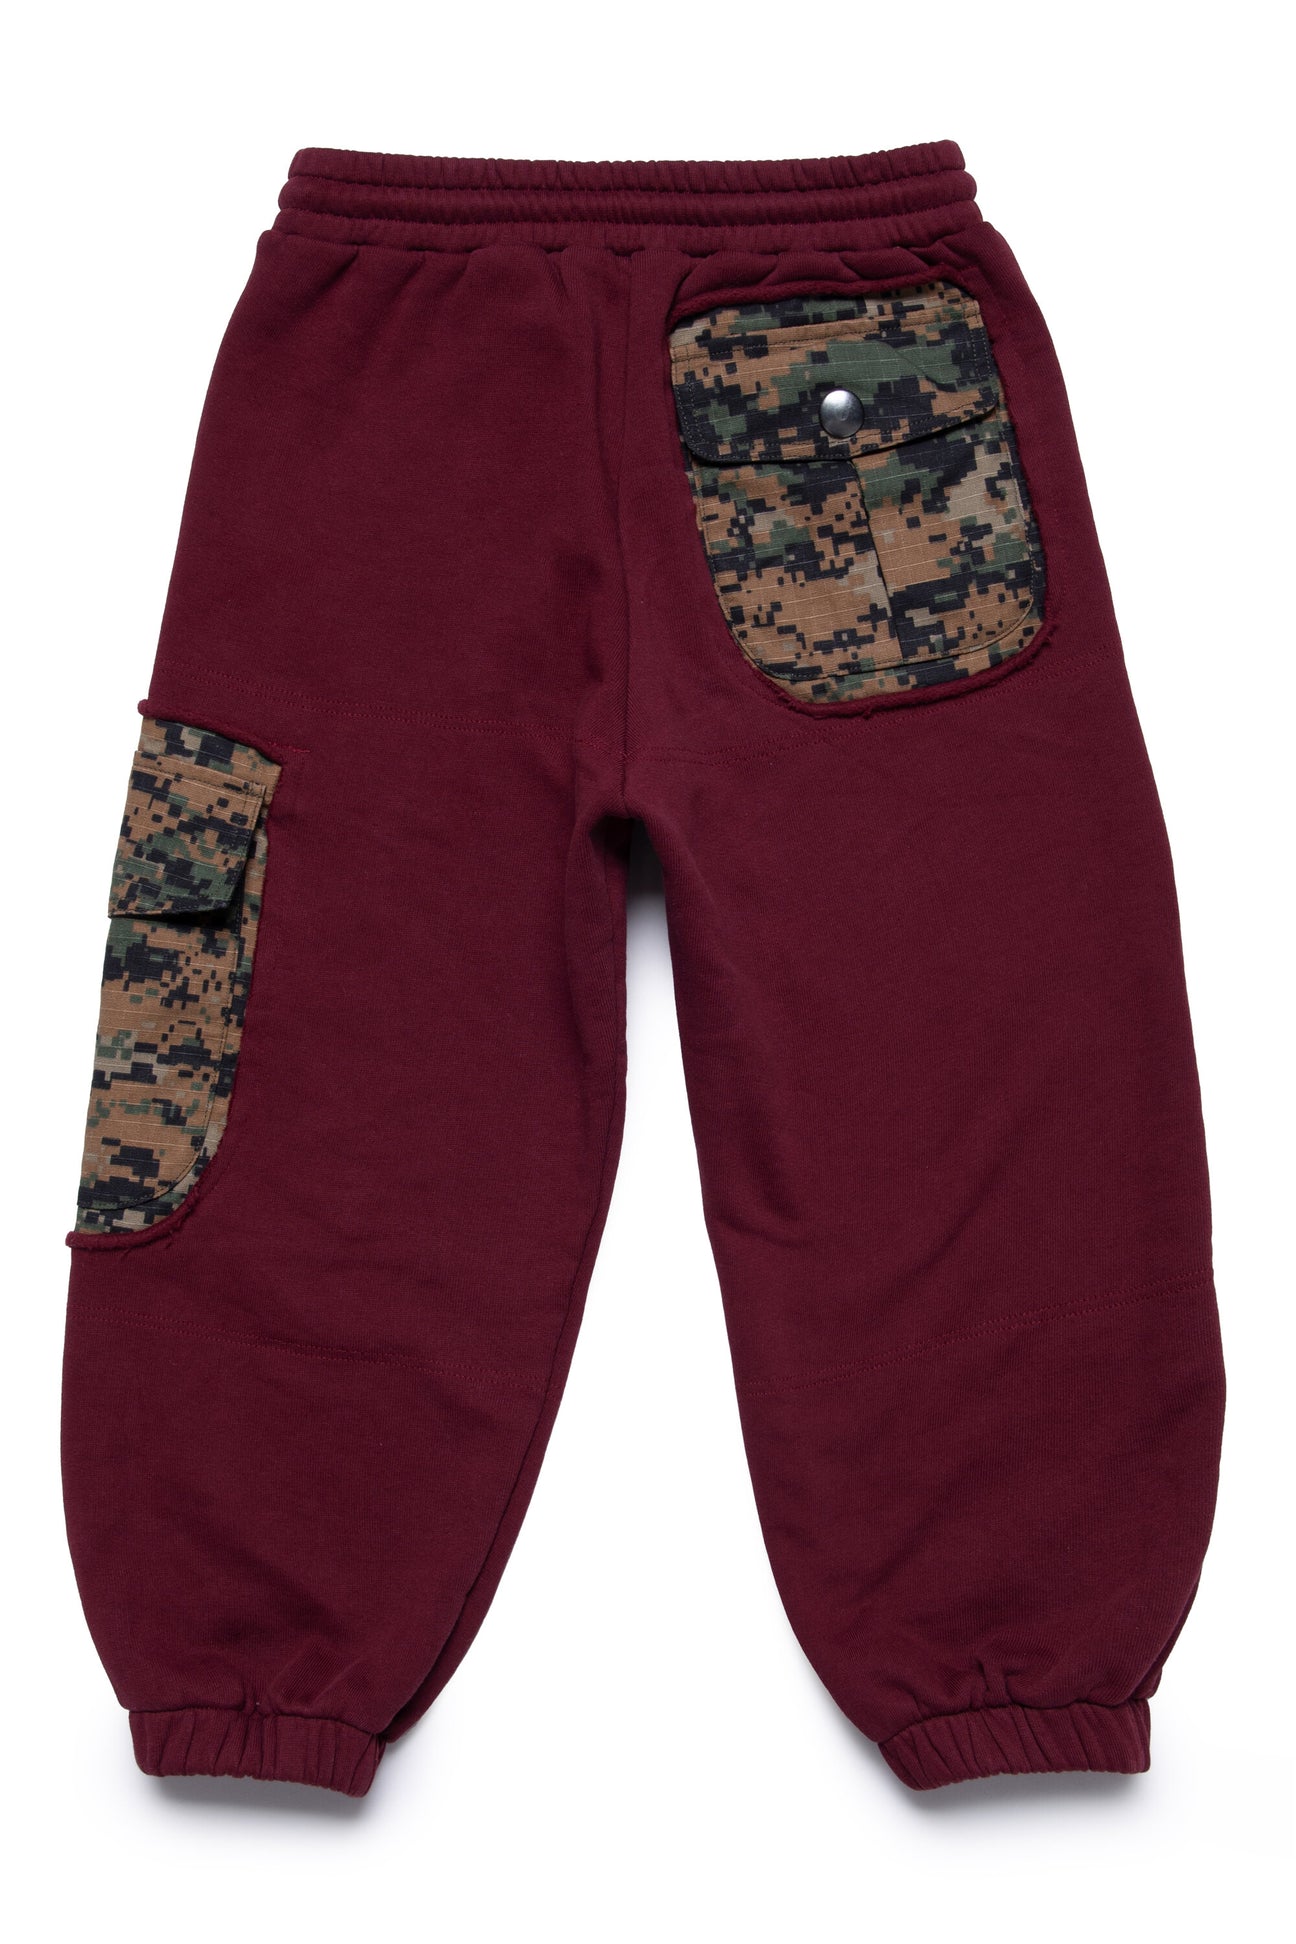 Deadstock fabric sweatpants with pocket application Deadstock fabric sweatpants with pocket application